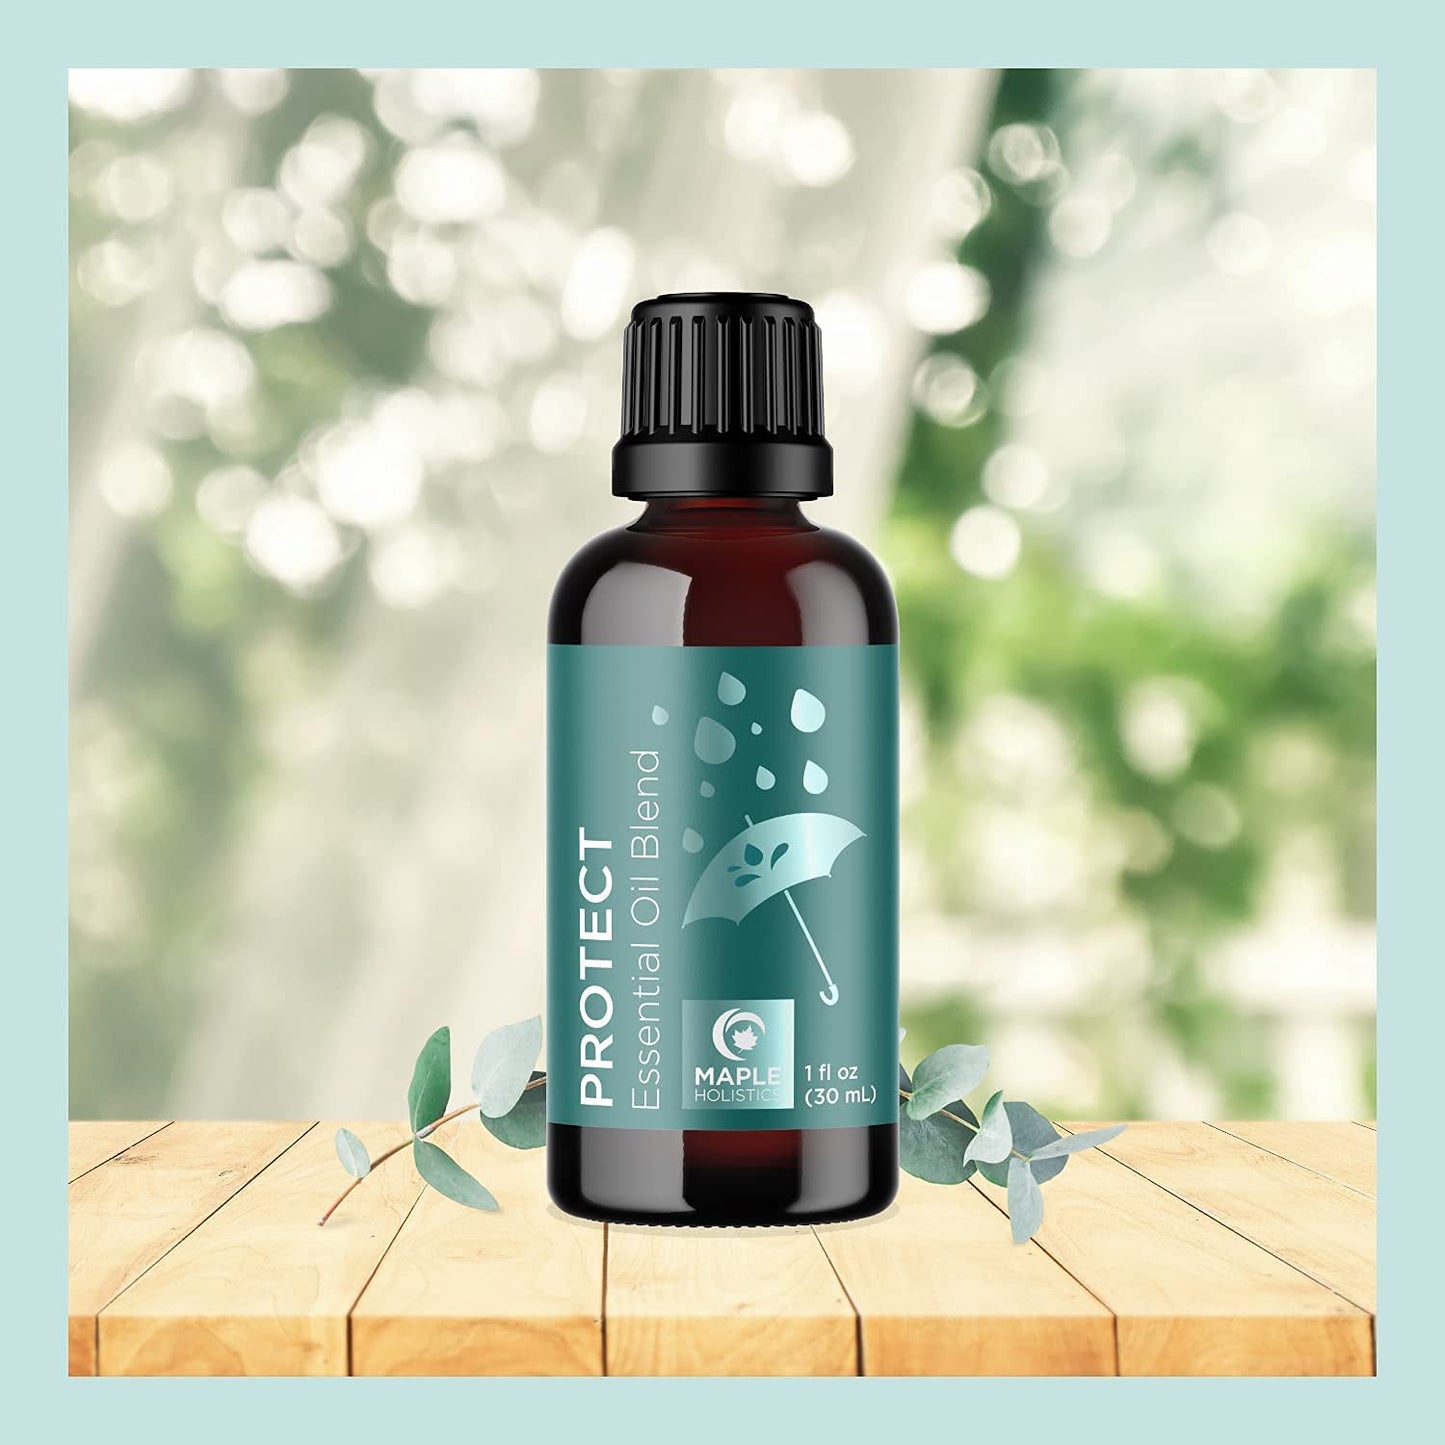 Thieves Myth Essential Oil Blend - Purification Essential Oil Blend for Diffuser of Undiluted Cinnamon Eucalyptus Lemon Rosemary and Clove Essential Oil - Cleansing Aromatherapy Diffuser Oil